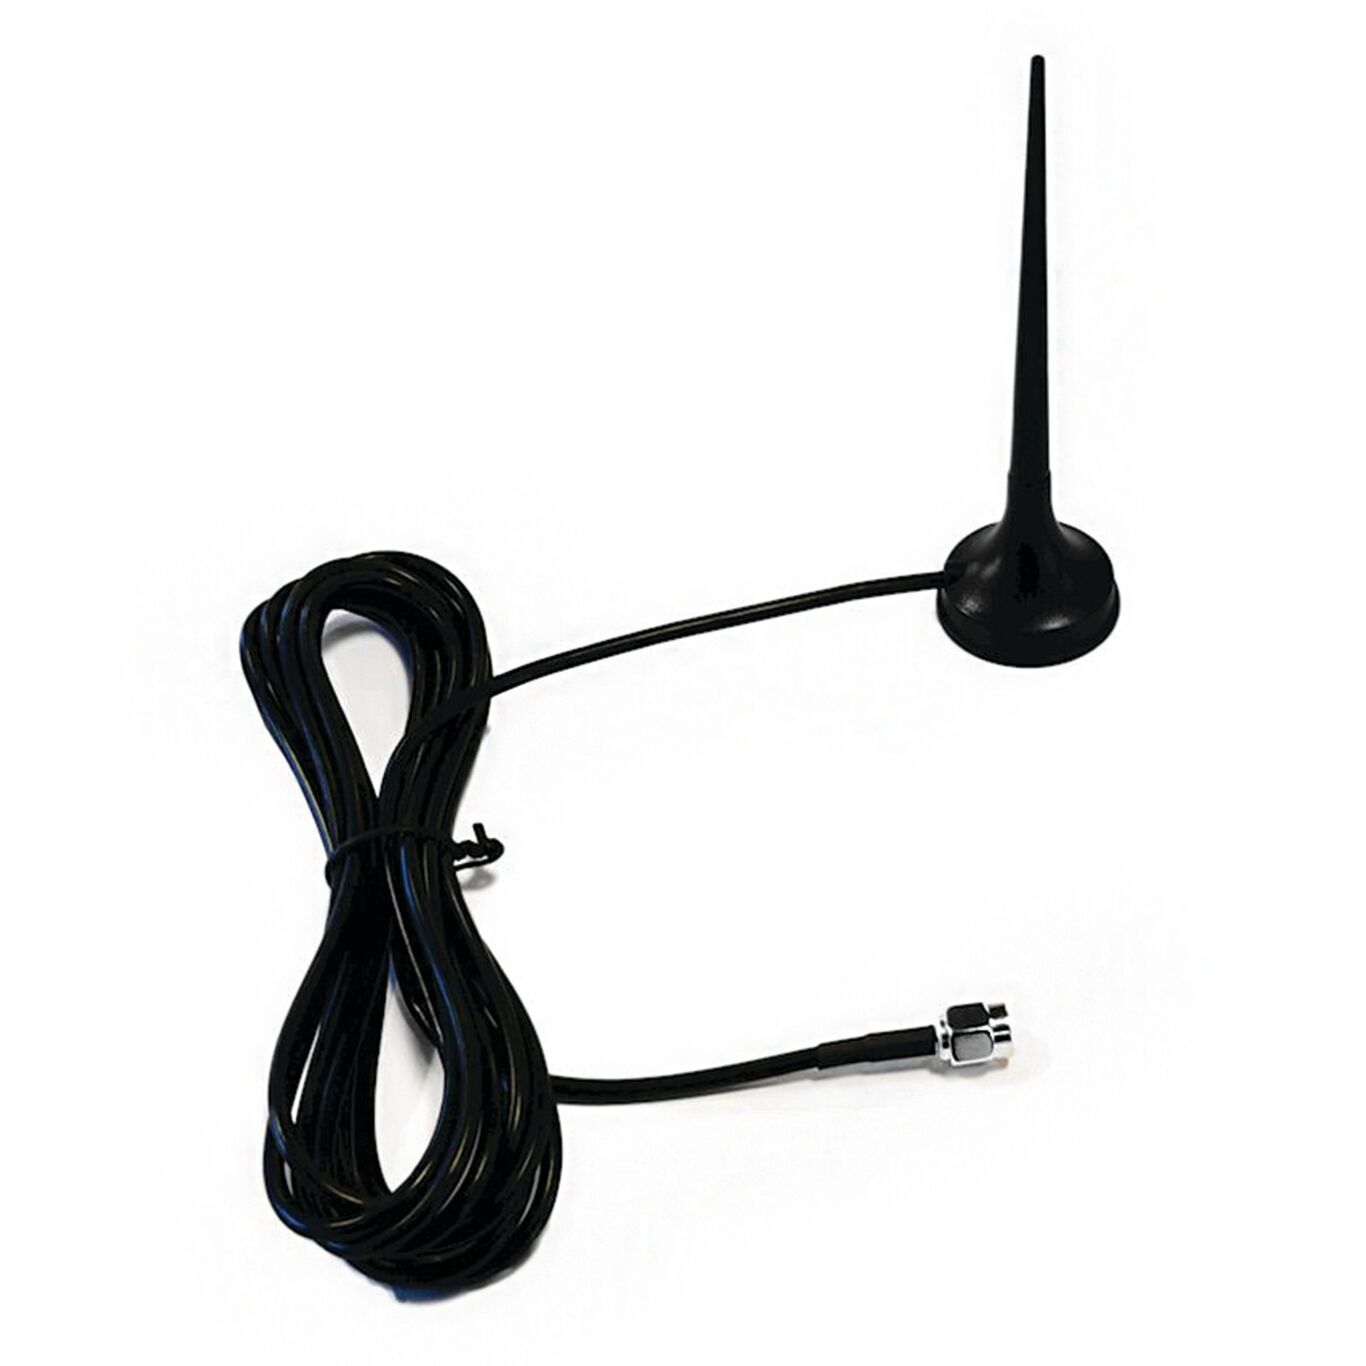 Product Image - External Antenna for Connected Roof System